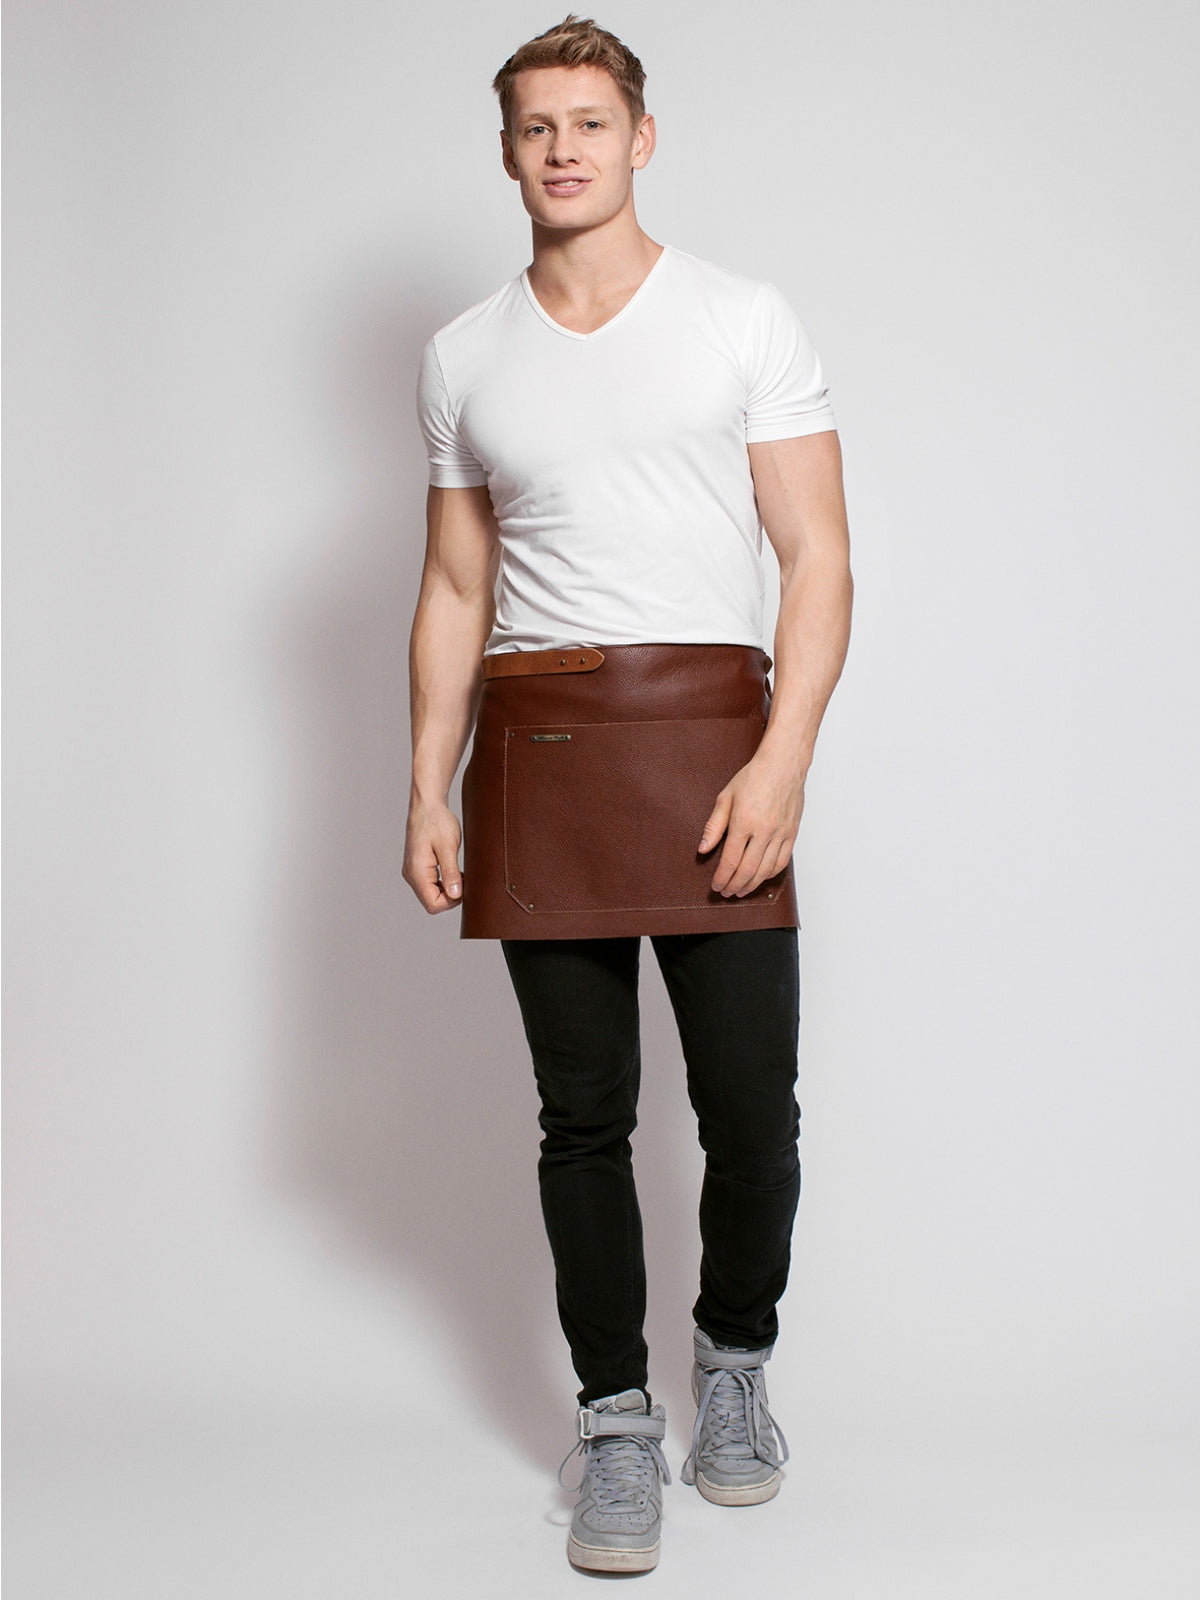 Leather Waist Apron Deluxe Brown